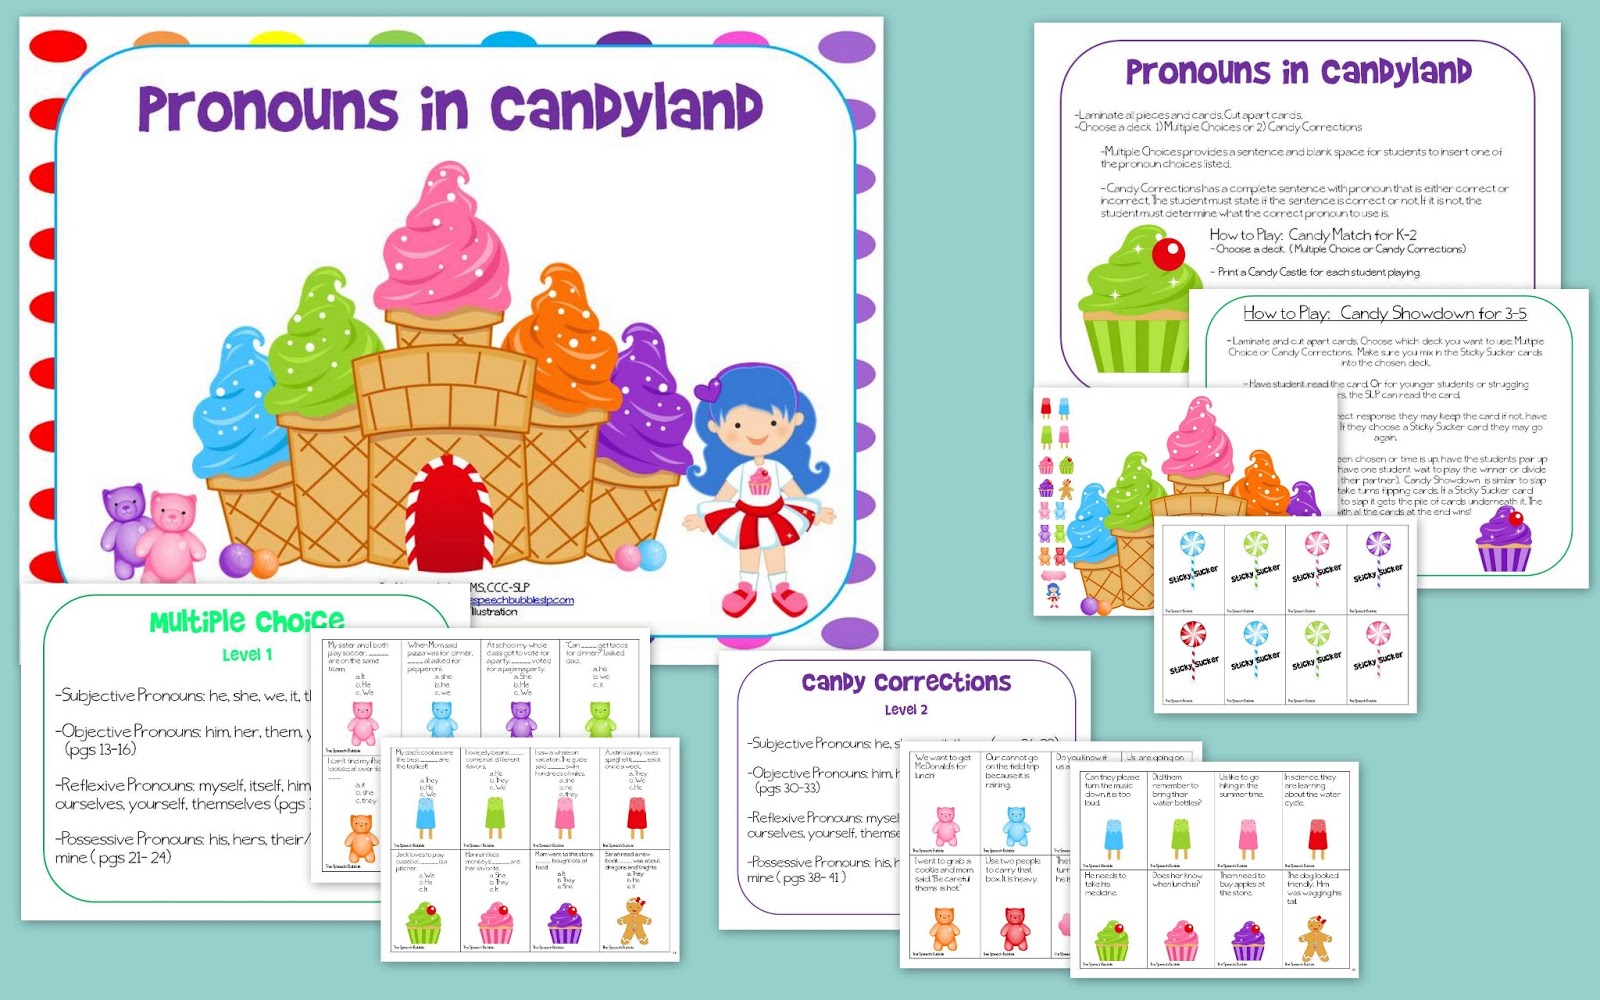 Pronouns in Candyland